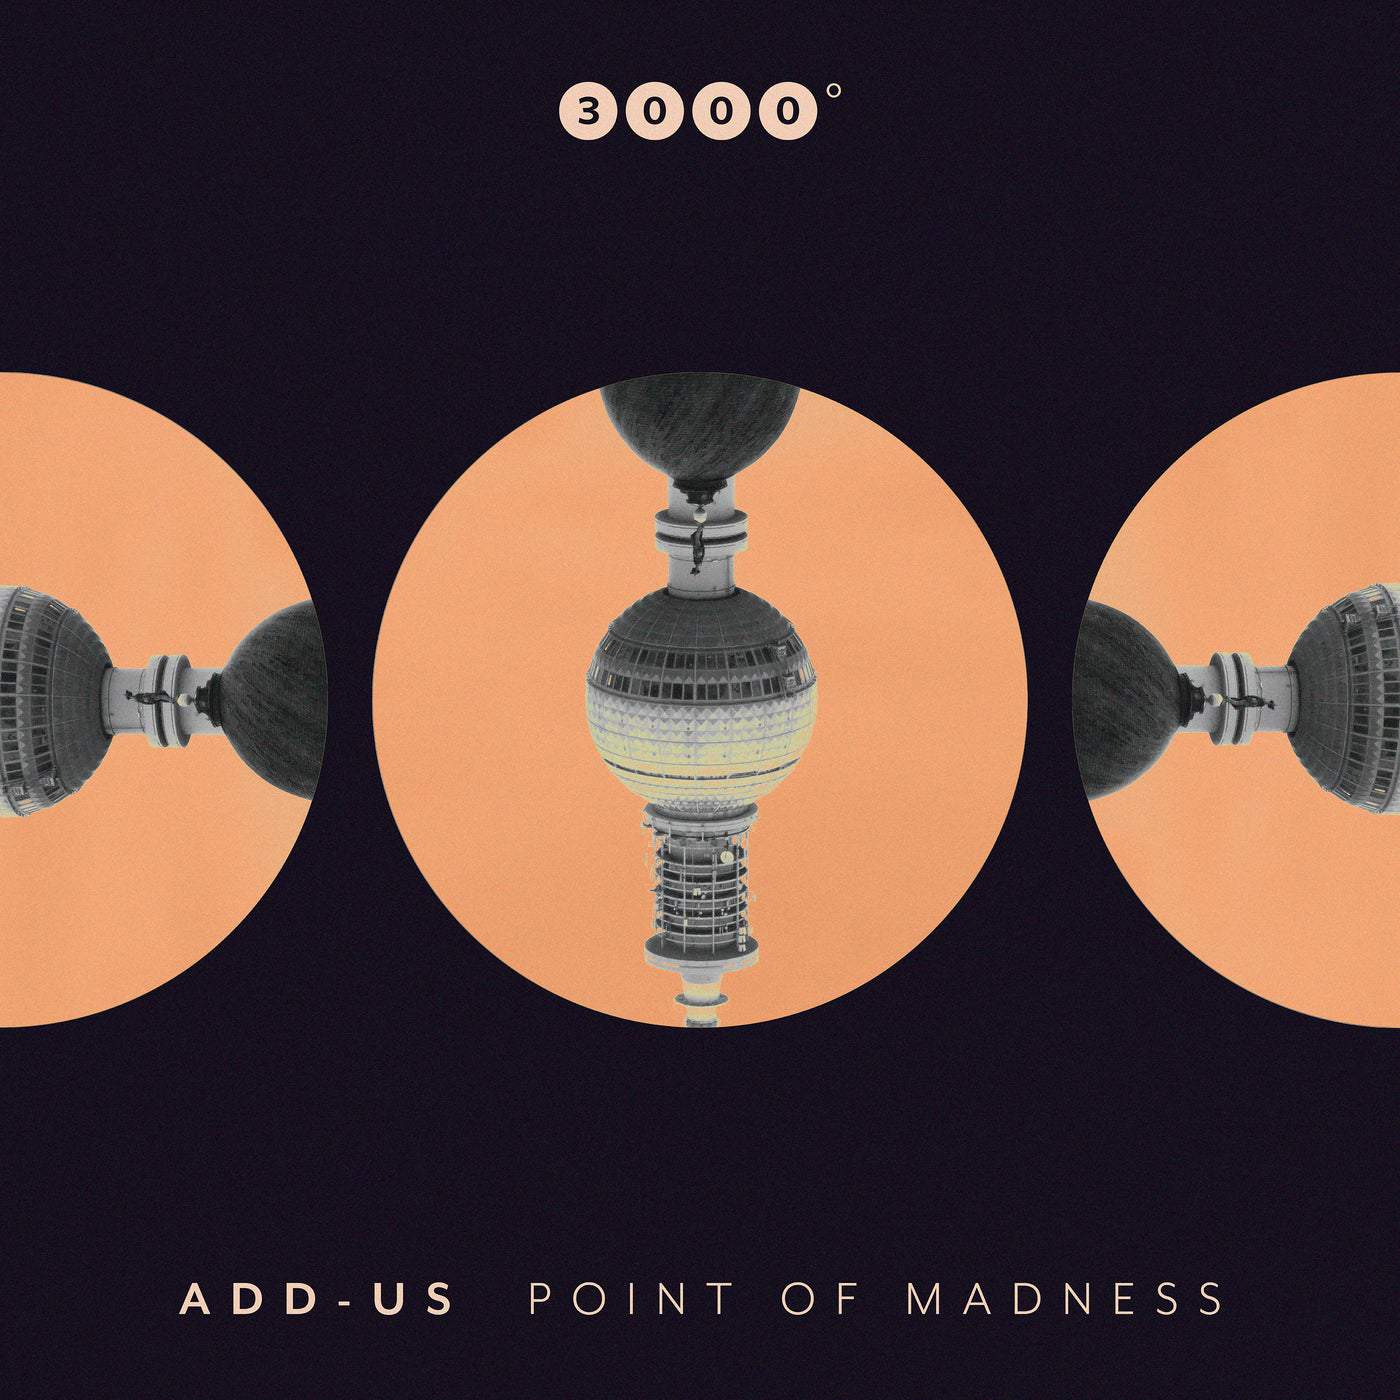 image cover: Add-us - Point of Madness / 3000127